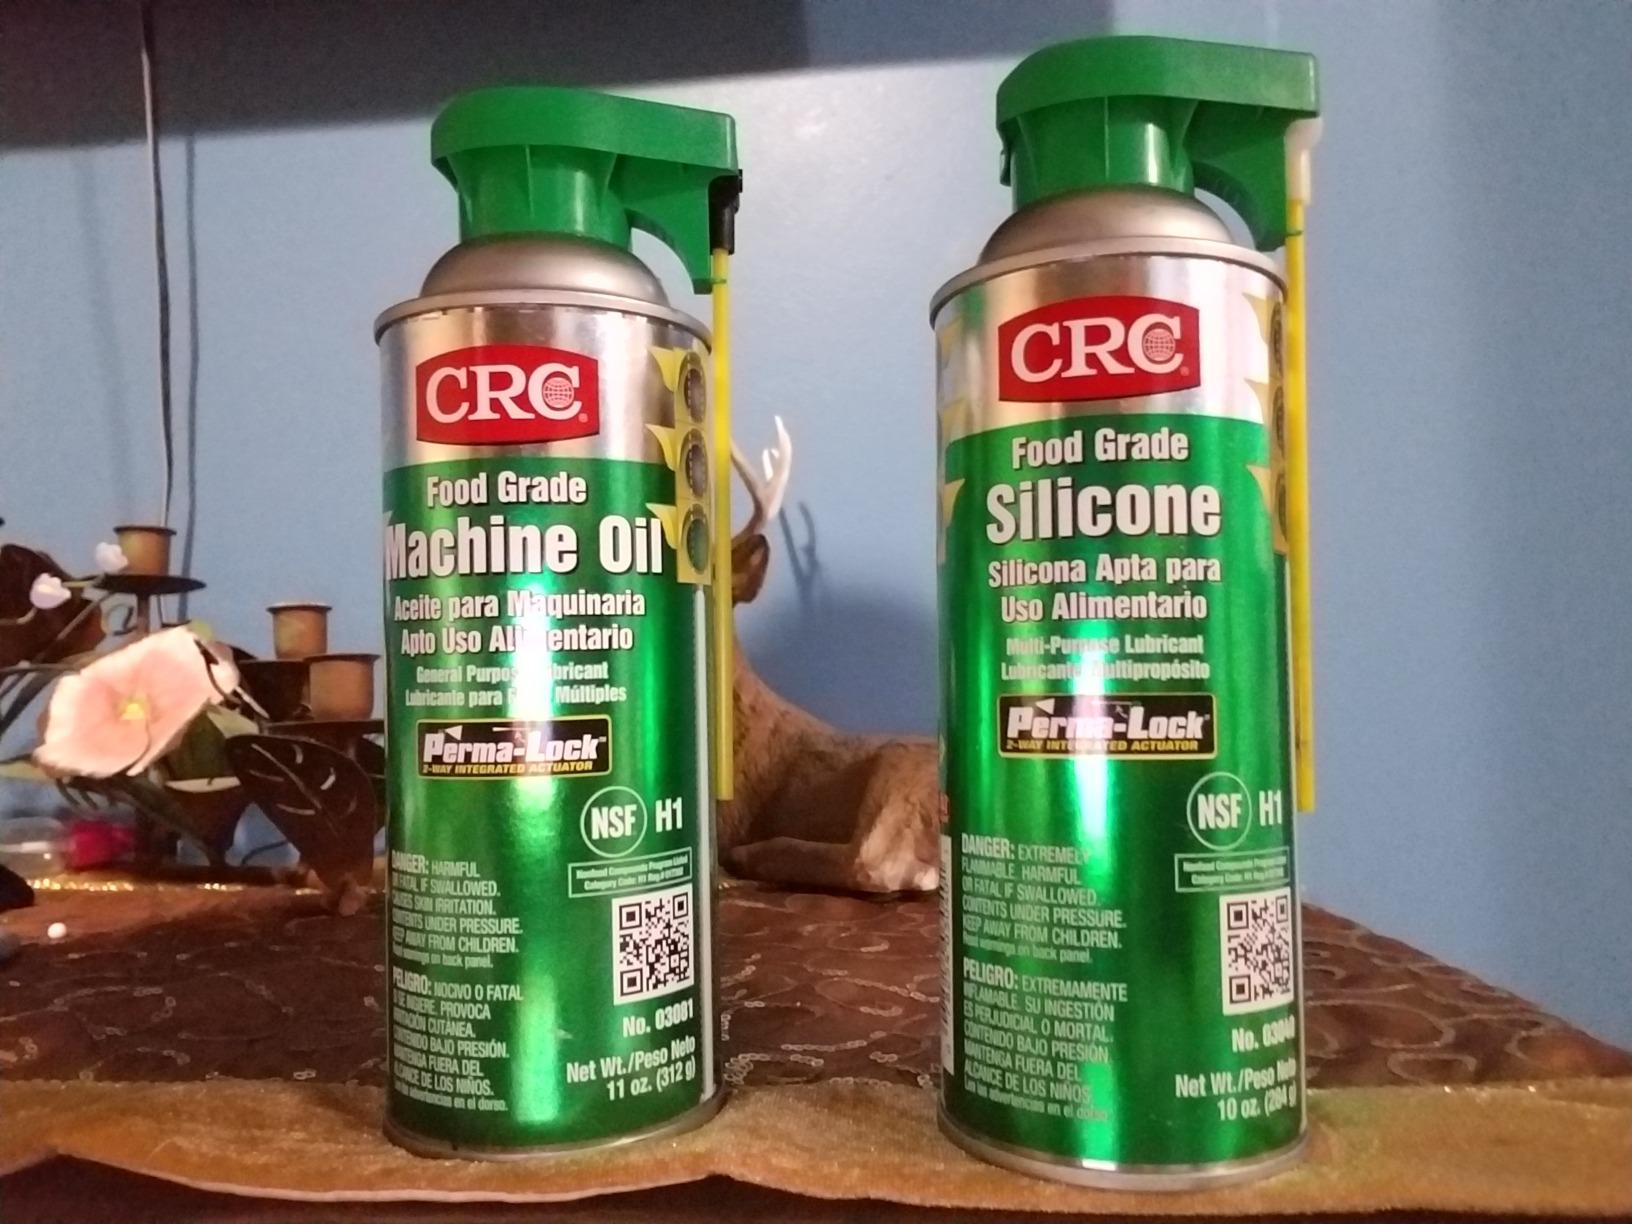 Would recommend usin mineral oil instead - cheaper